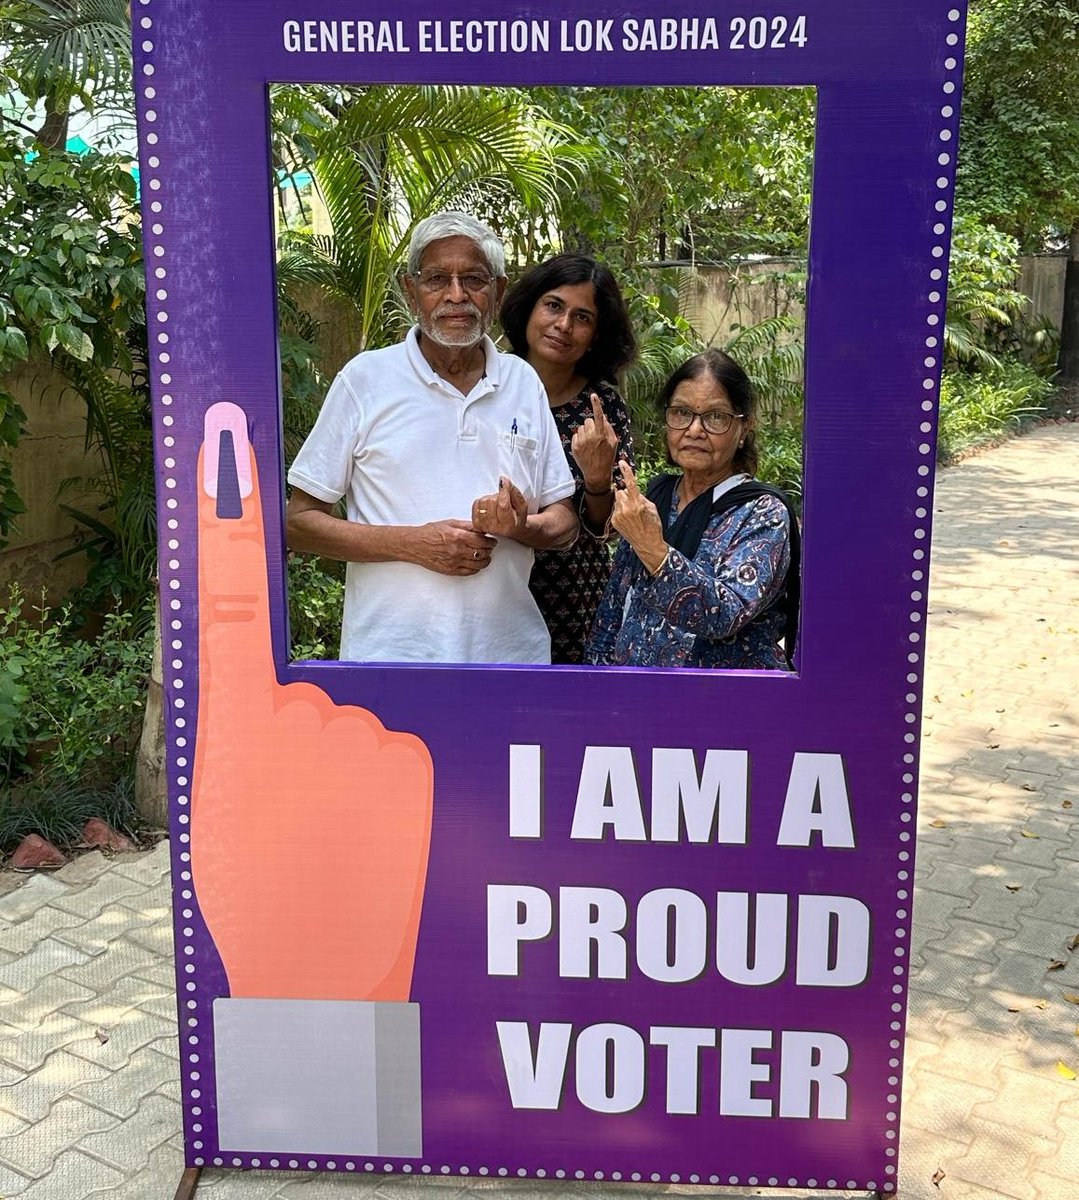 News coming from NCR .... Parents voted!